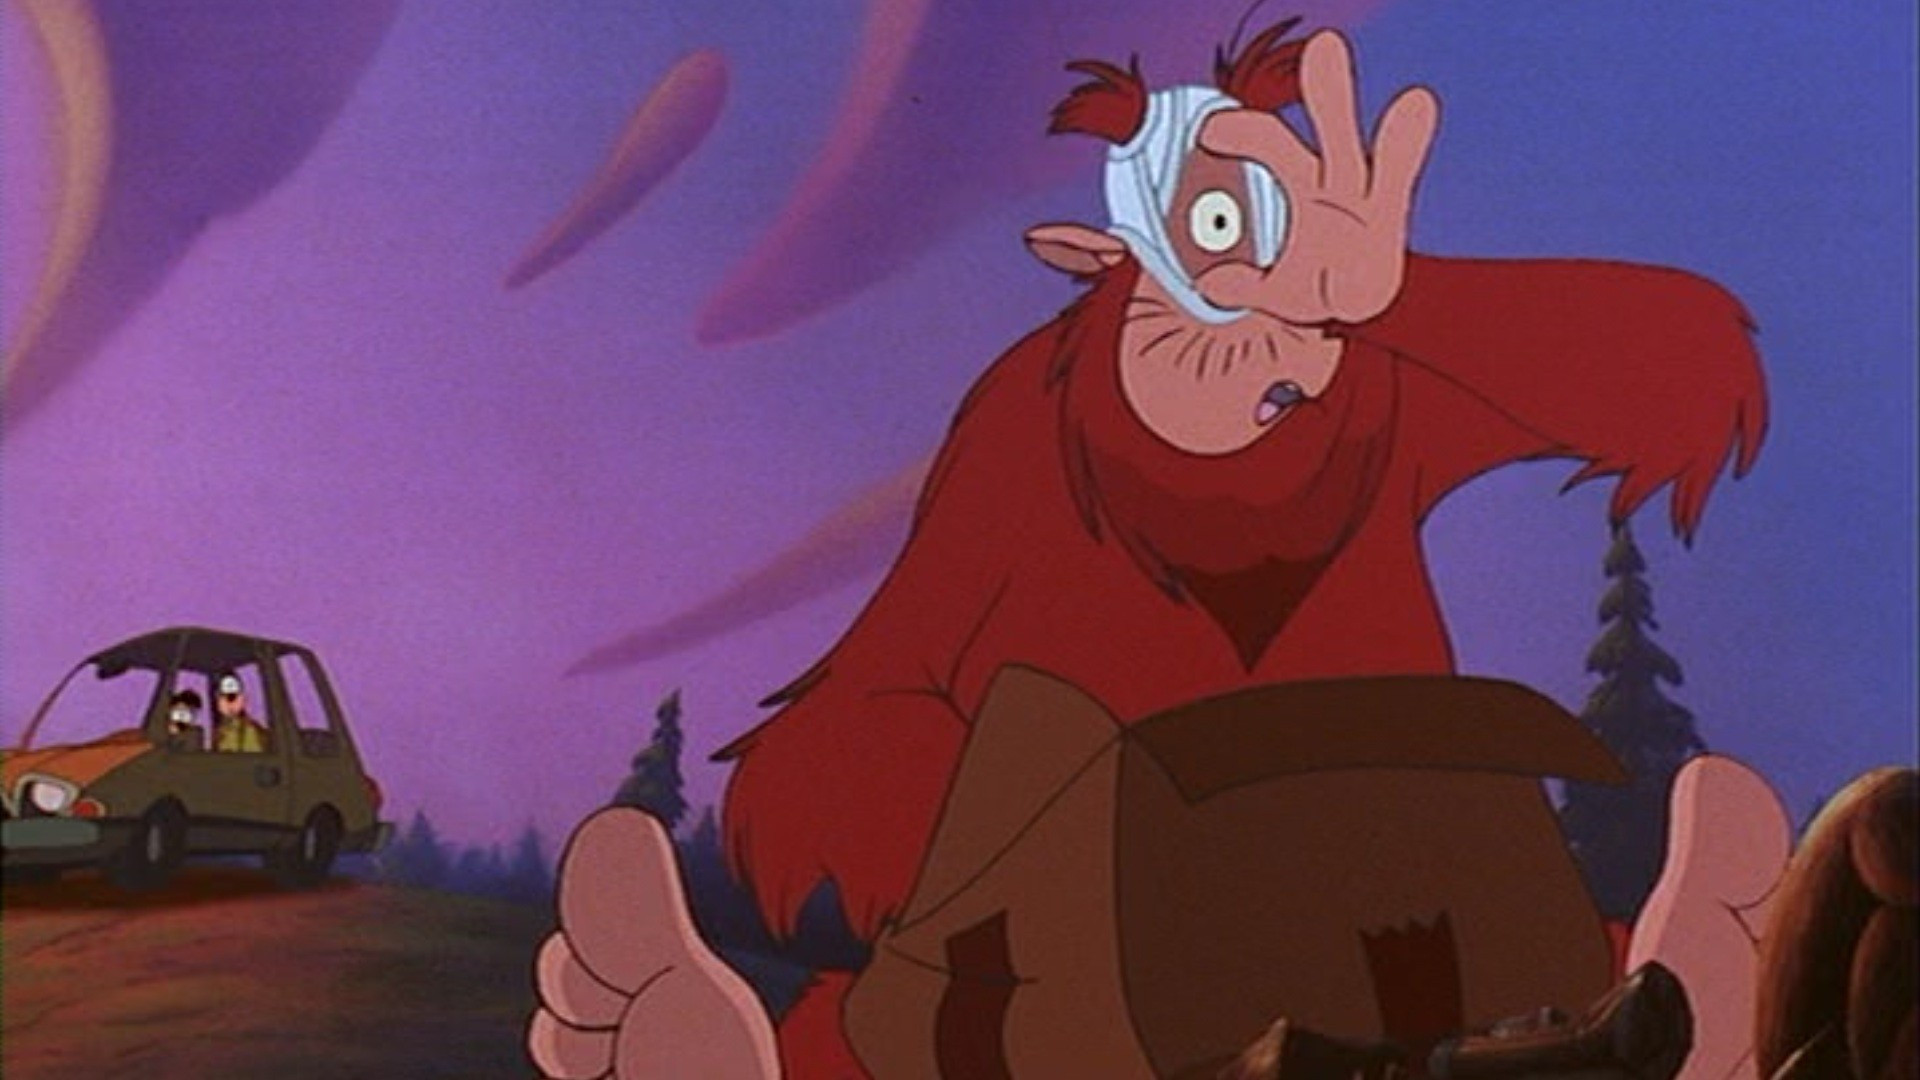 Bigfoot, a giant humanoid creature with red fur, sits in front of a cardboard box with a downward pointing  arrow on the side, wearing a pair of white men's briefs underwear on his head.  He holds the crotch hole open with his fingers so he can look out.  Goofy, a dog-like humanoid cartoon with black skin and a pale face, and long ears, watches from his yellow car several hundred feet behind Bigfoot, with his son Max in the passenger seat; Max looks similar to Goofy.